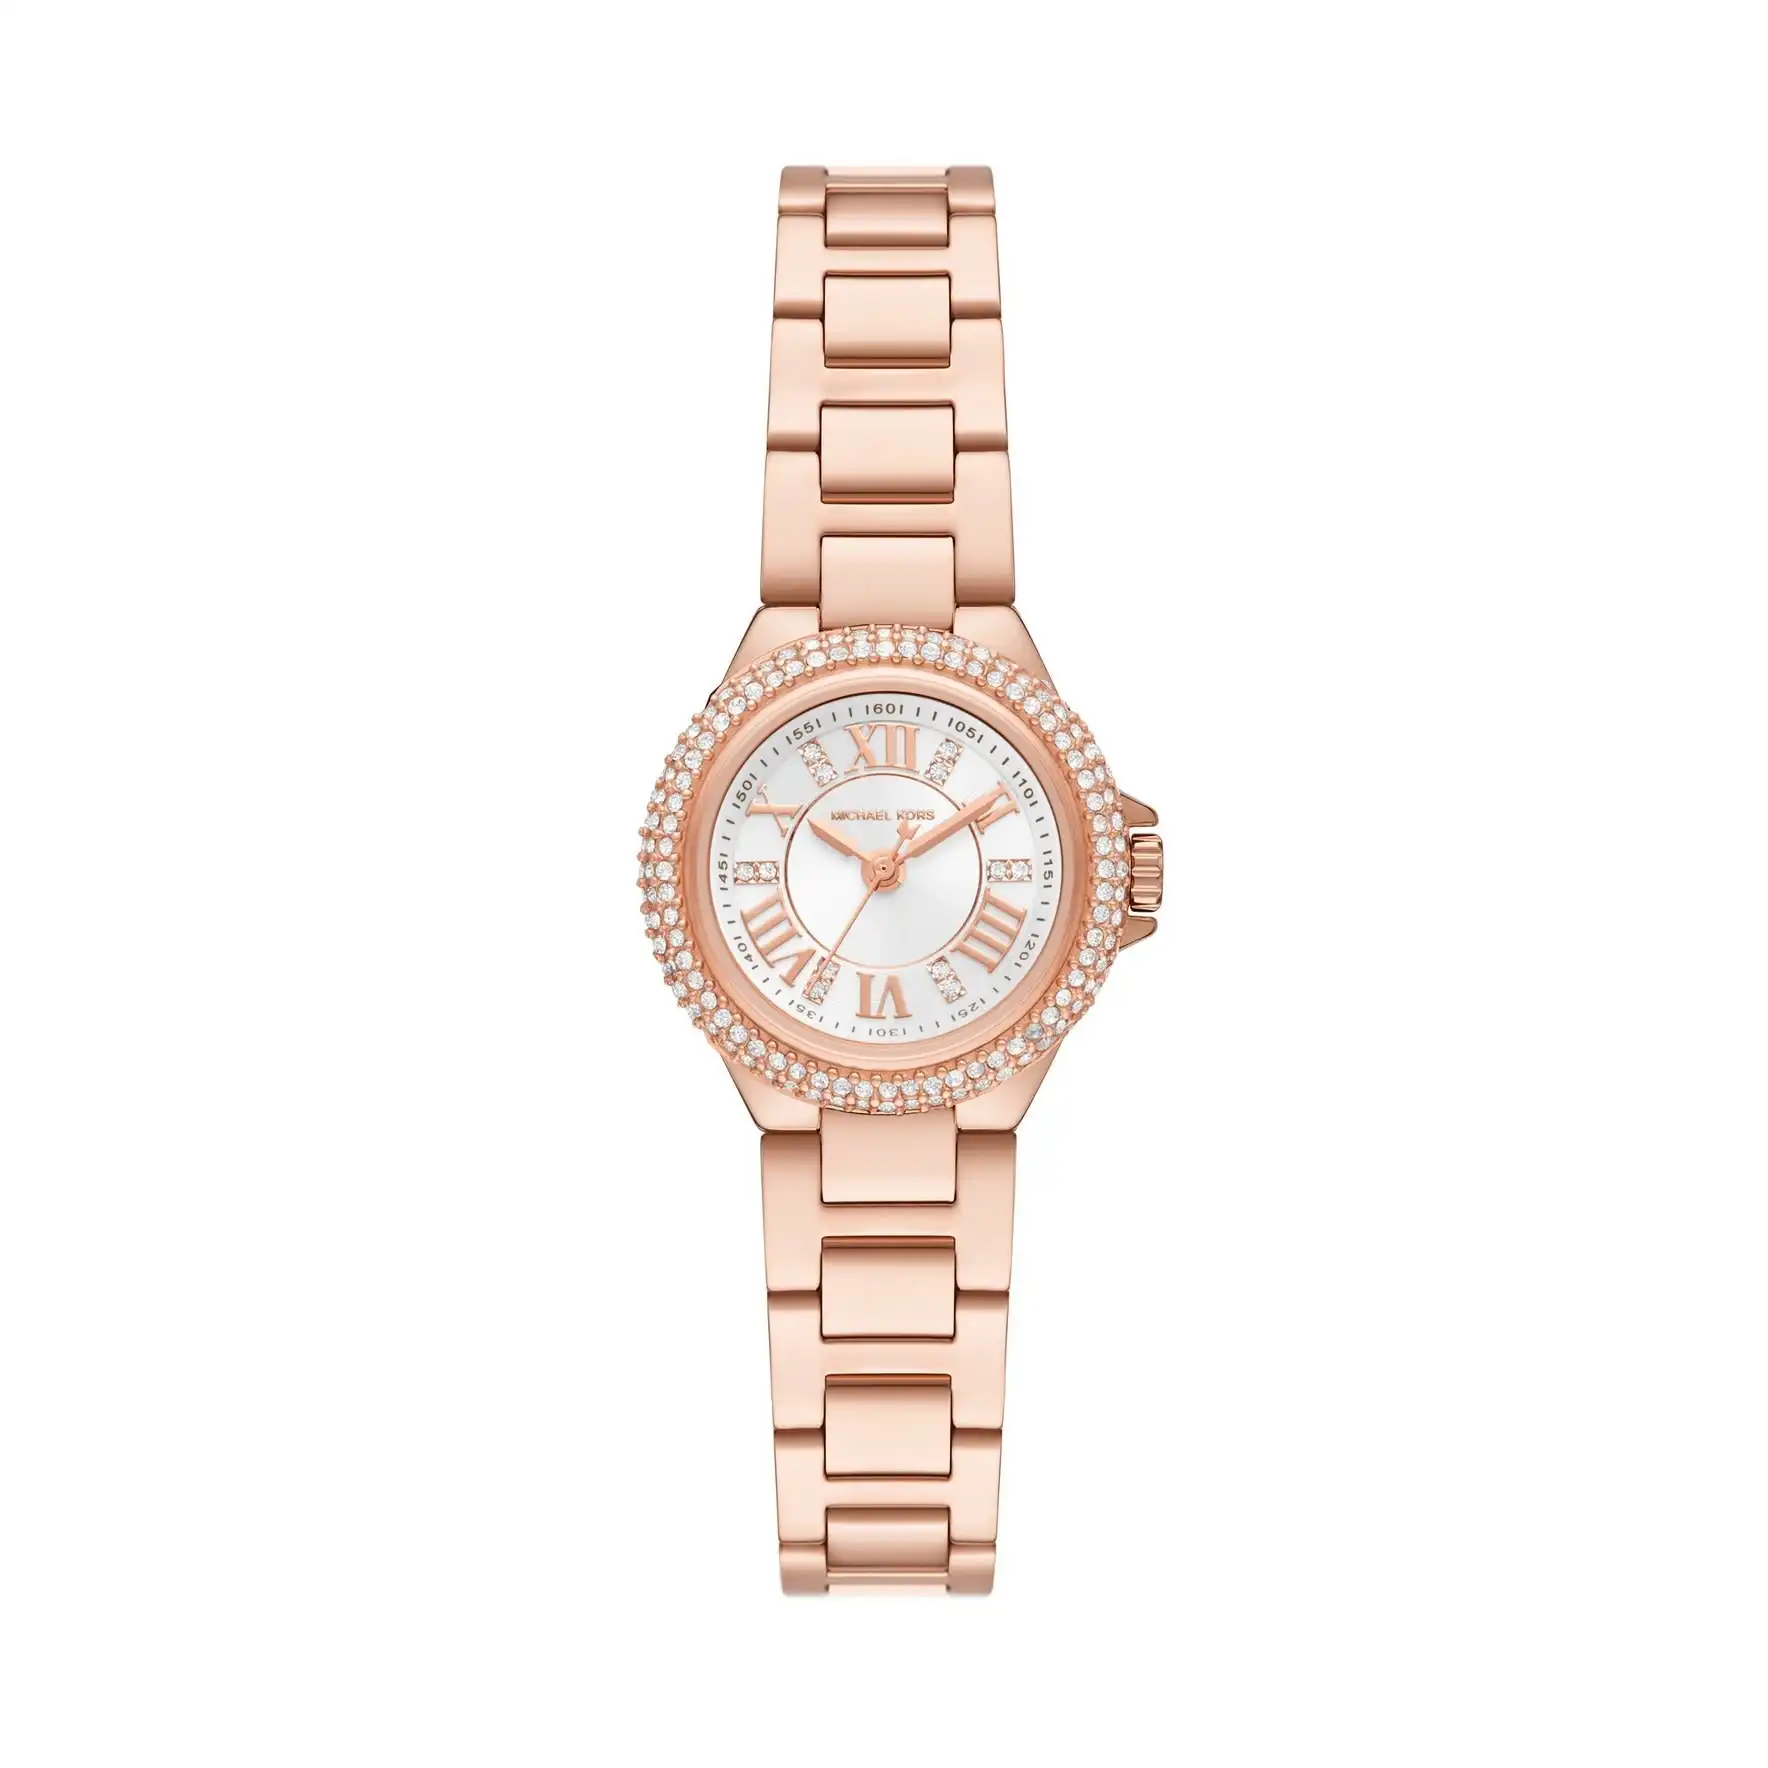 Michael Kors Women's Petite Camille Three-Hand Rose Gold-Tone Stainless Steel Watch MK3253